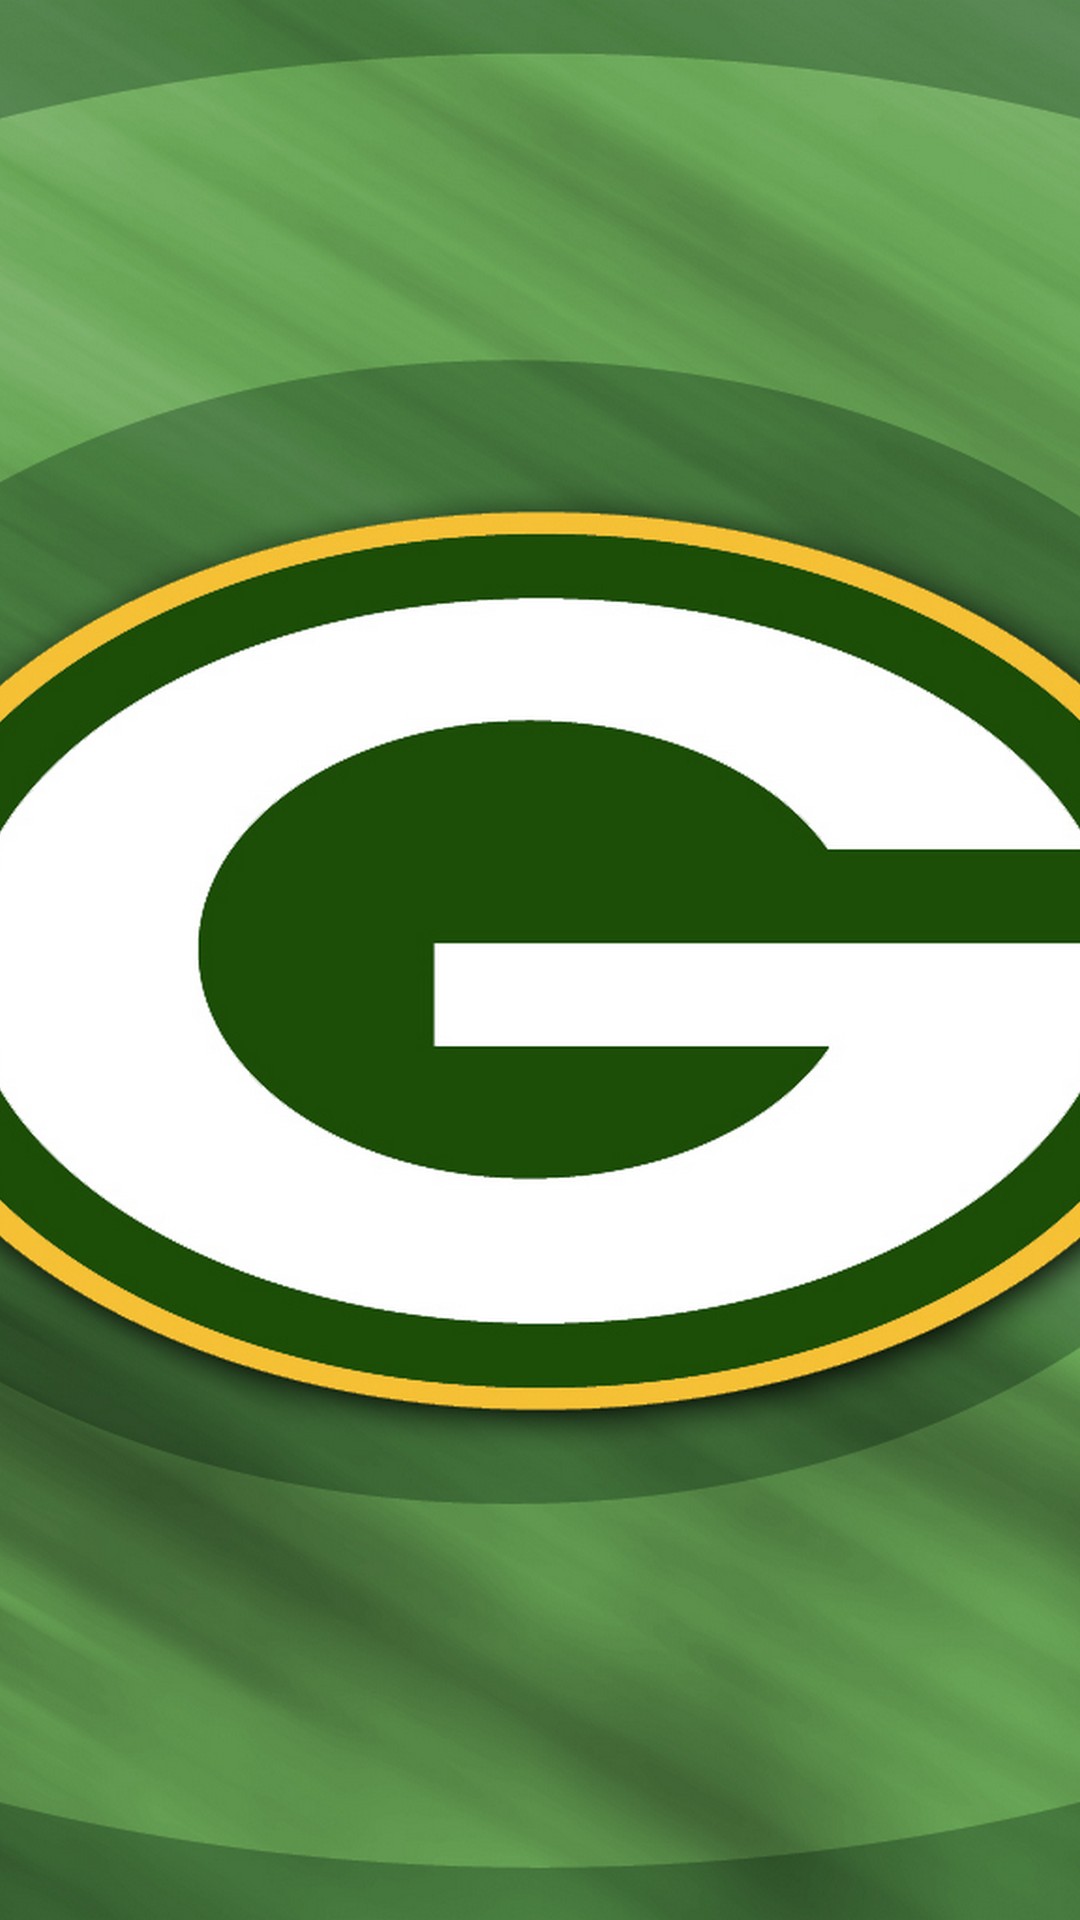 Green Bay Packers Logo iPhone Screen Wallpaper With high-resolution 1080X1920 pixel. Donwload and set as wallpaper for your iPhone X, iPhone XS home screen backgrounds, XS Max, XR, iPhone8 lock screen wallpaper, iPhone 7, 6, SE, and other mobile devices